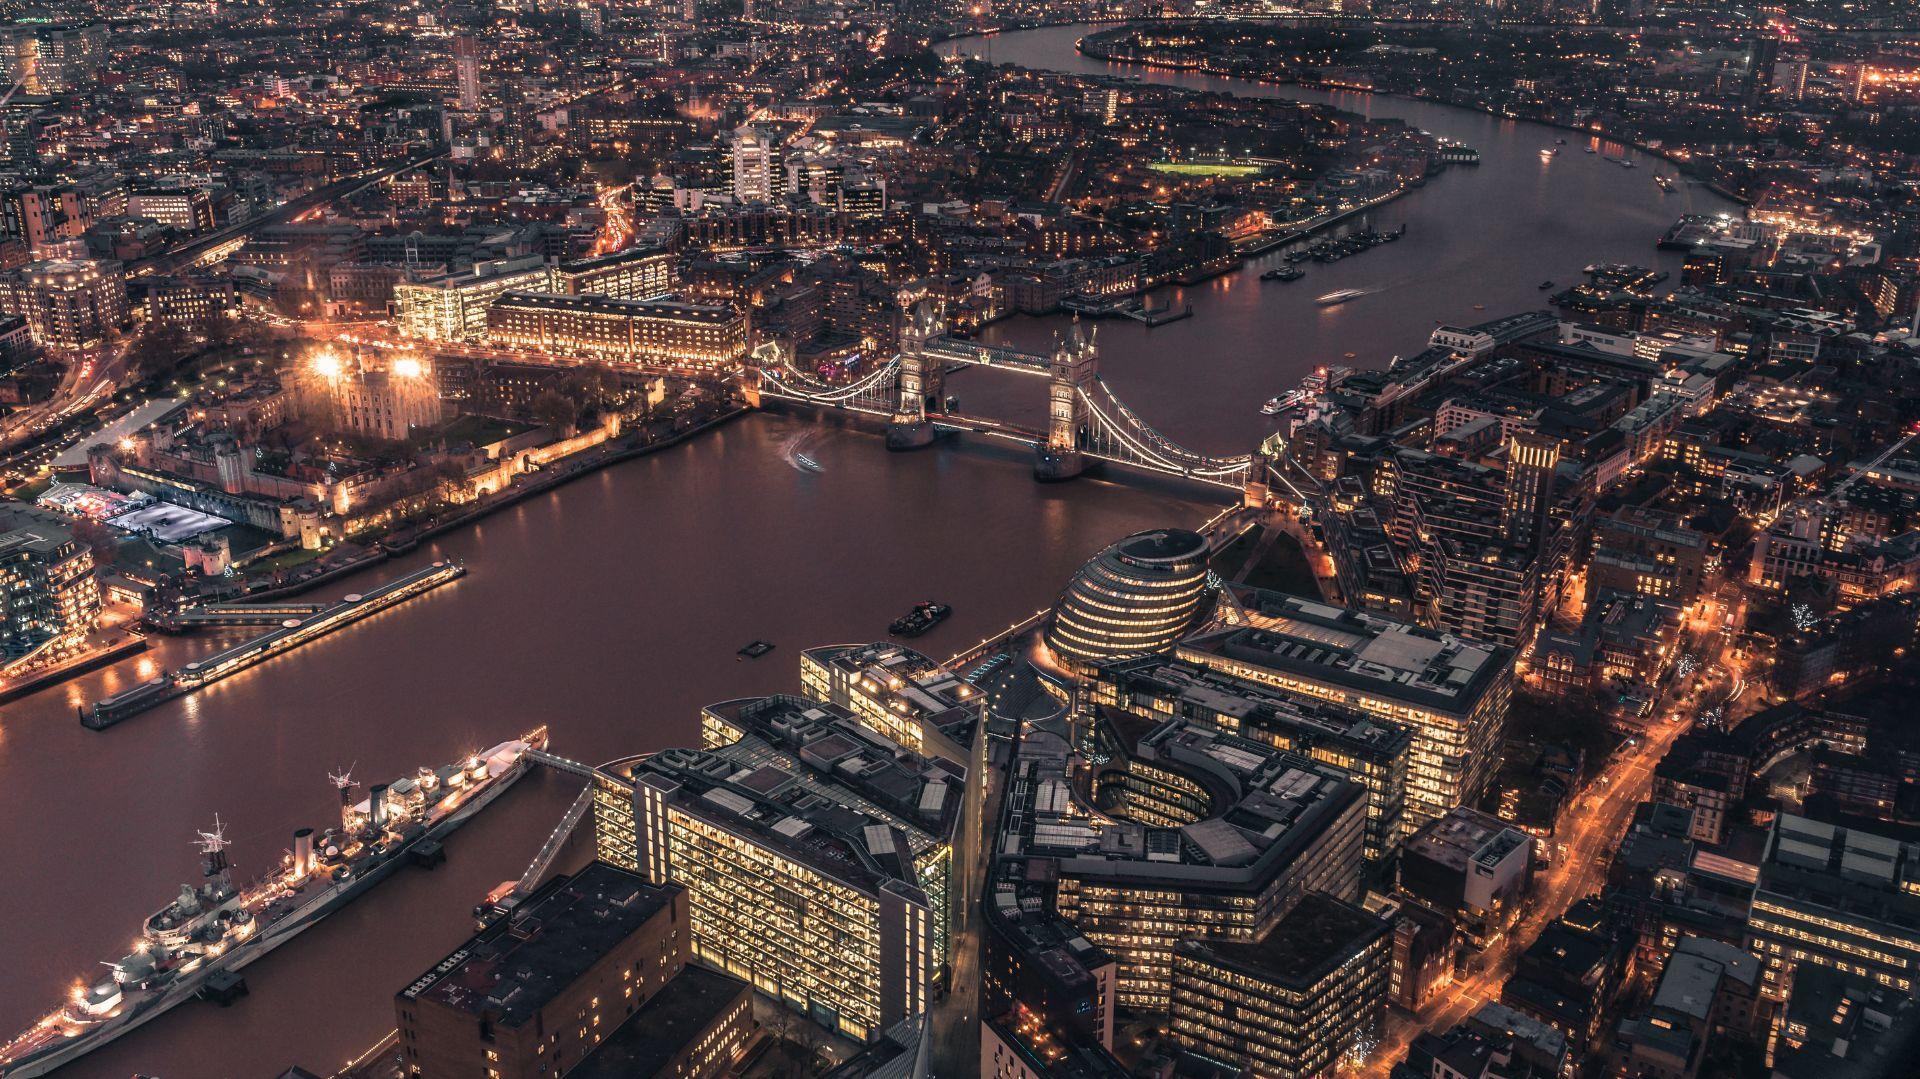 Best City Of Is London According To A Survey